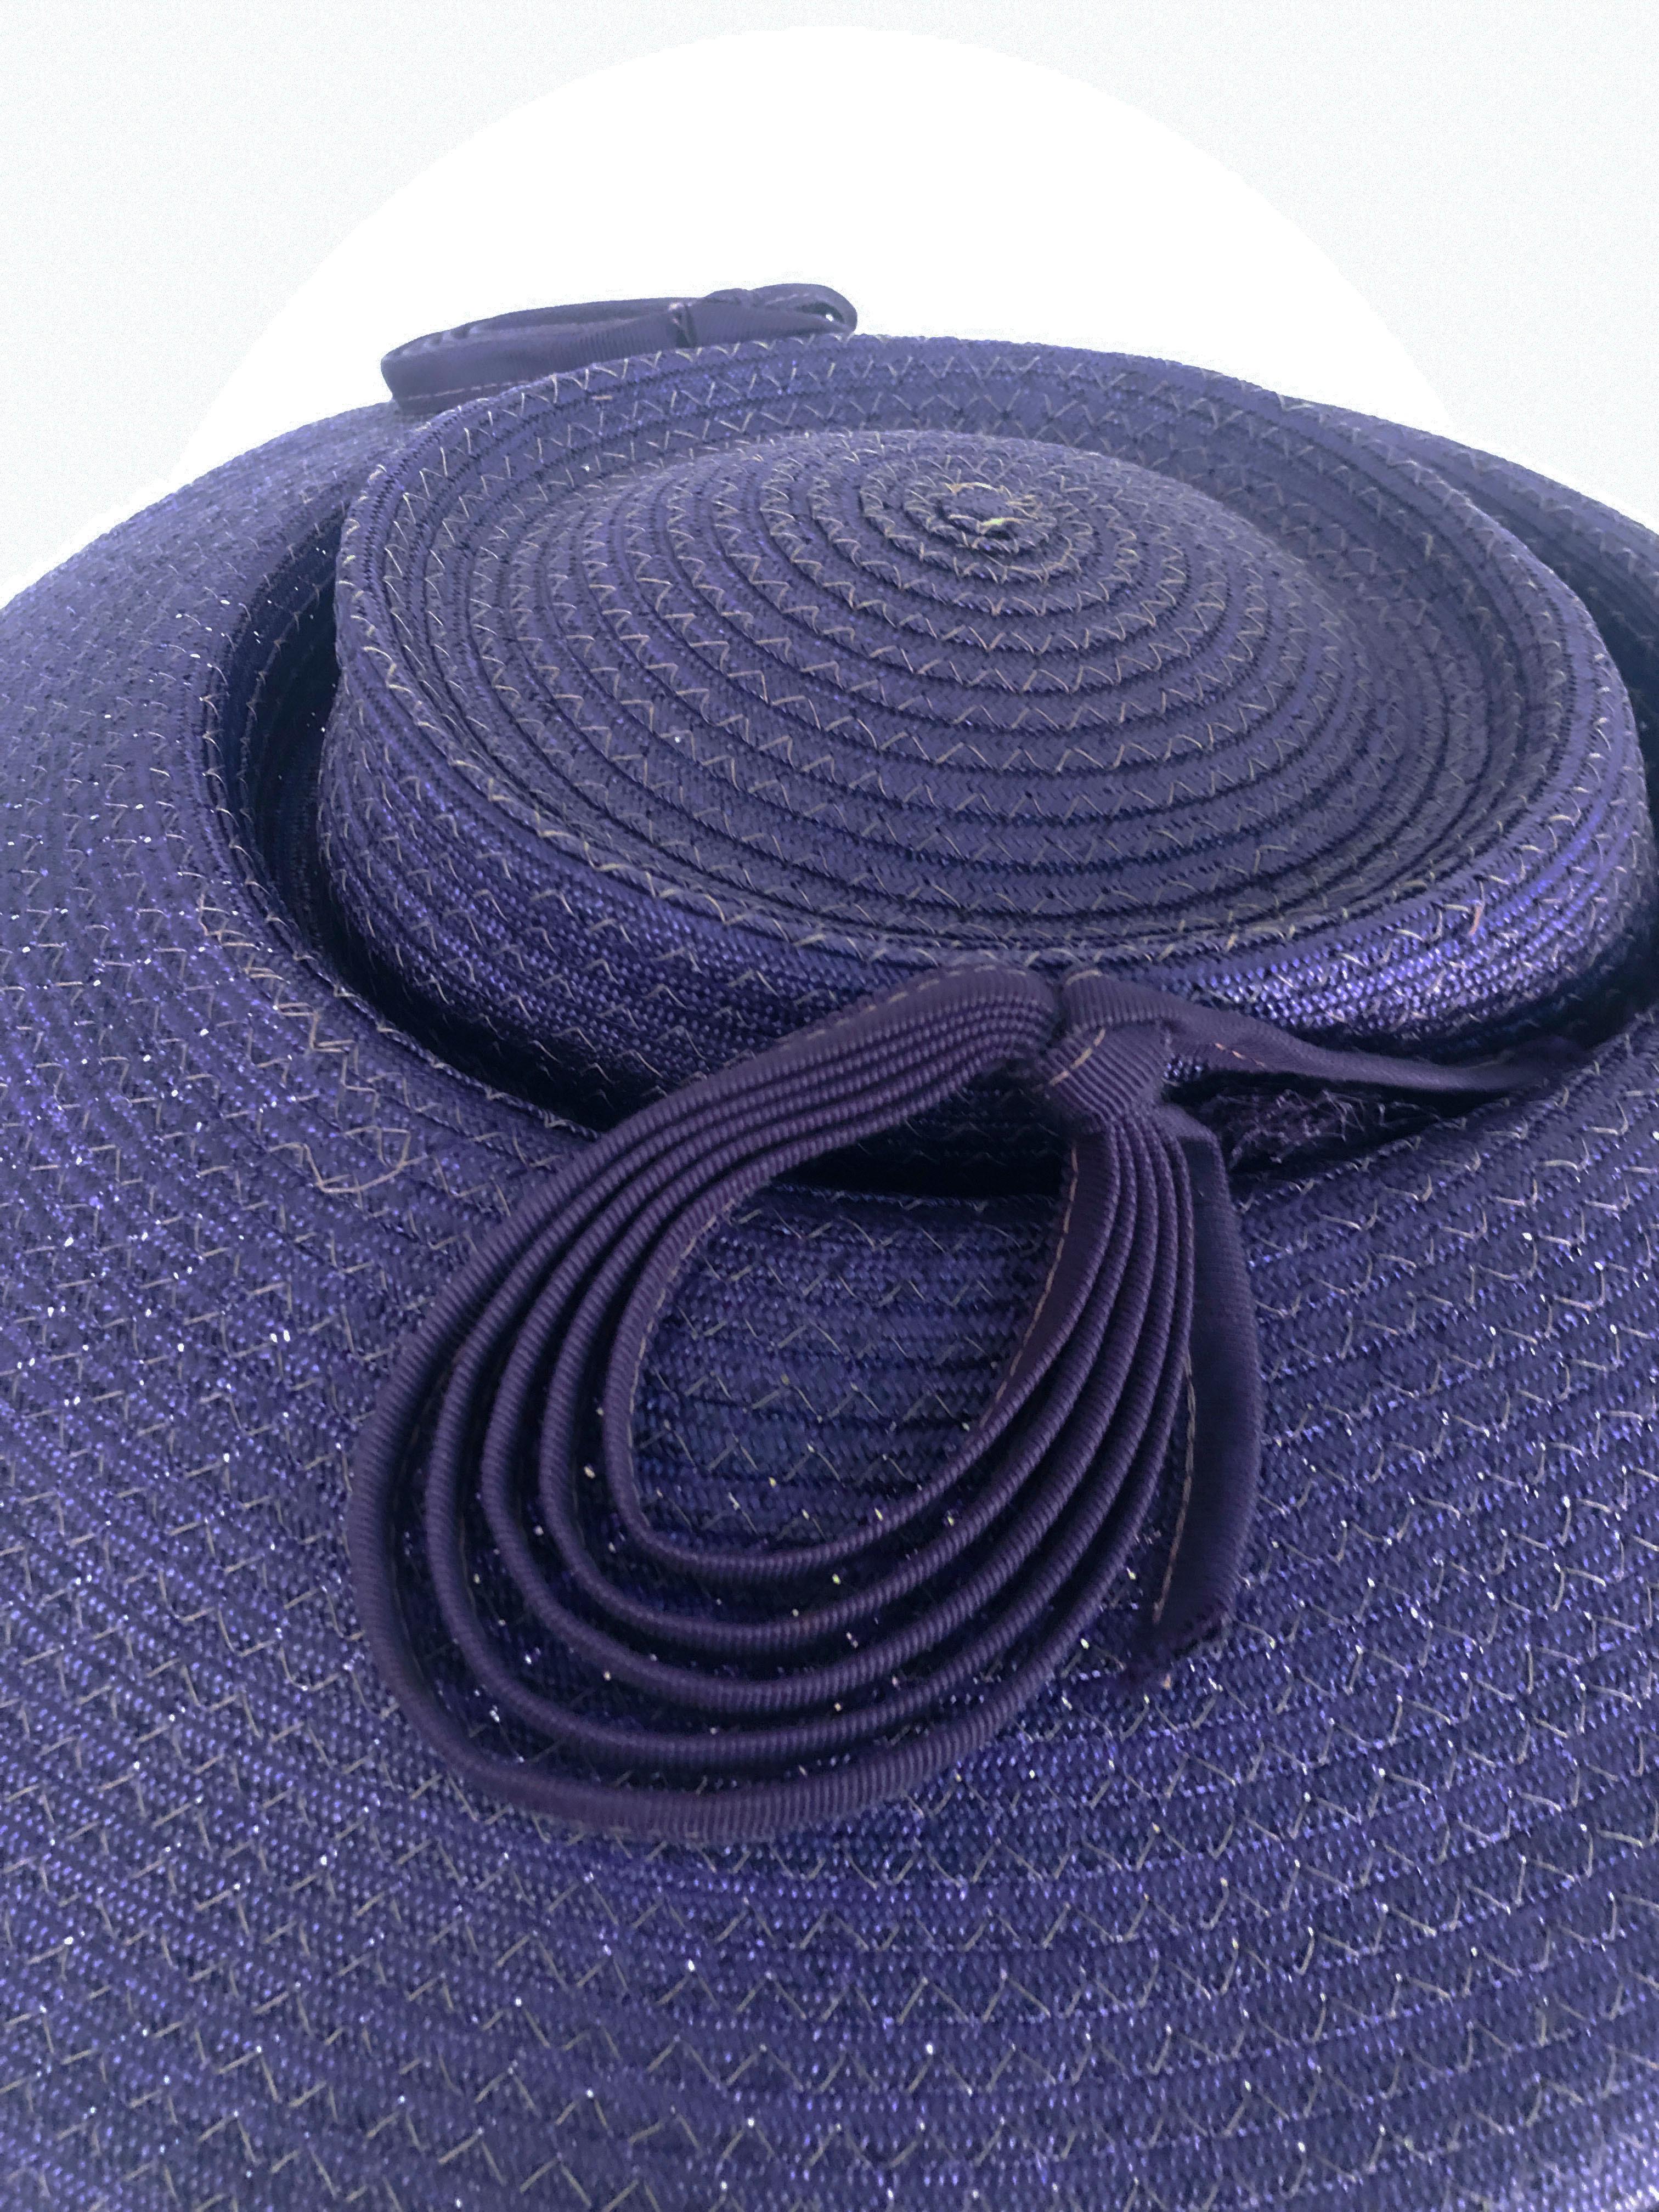 Women's 1930's Purple Coated Straw Hat with Loop Accents